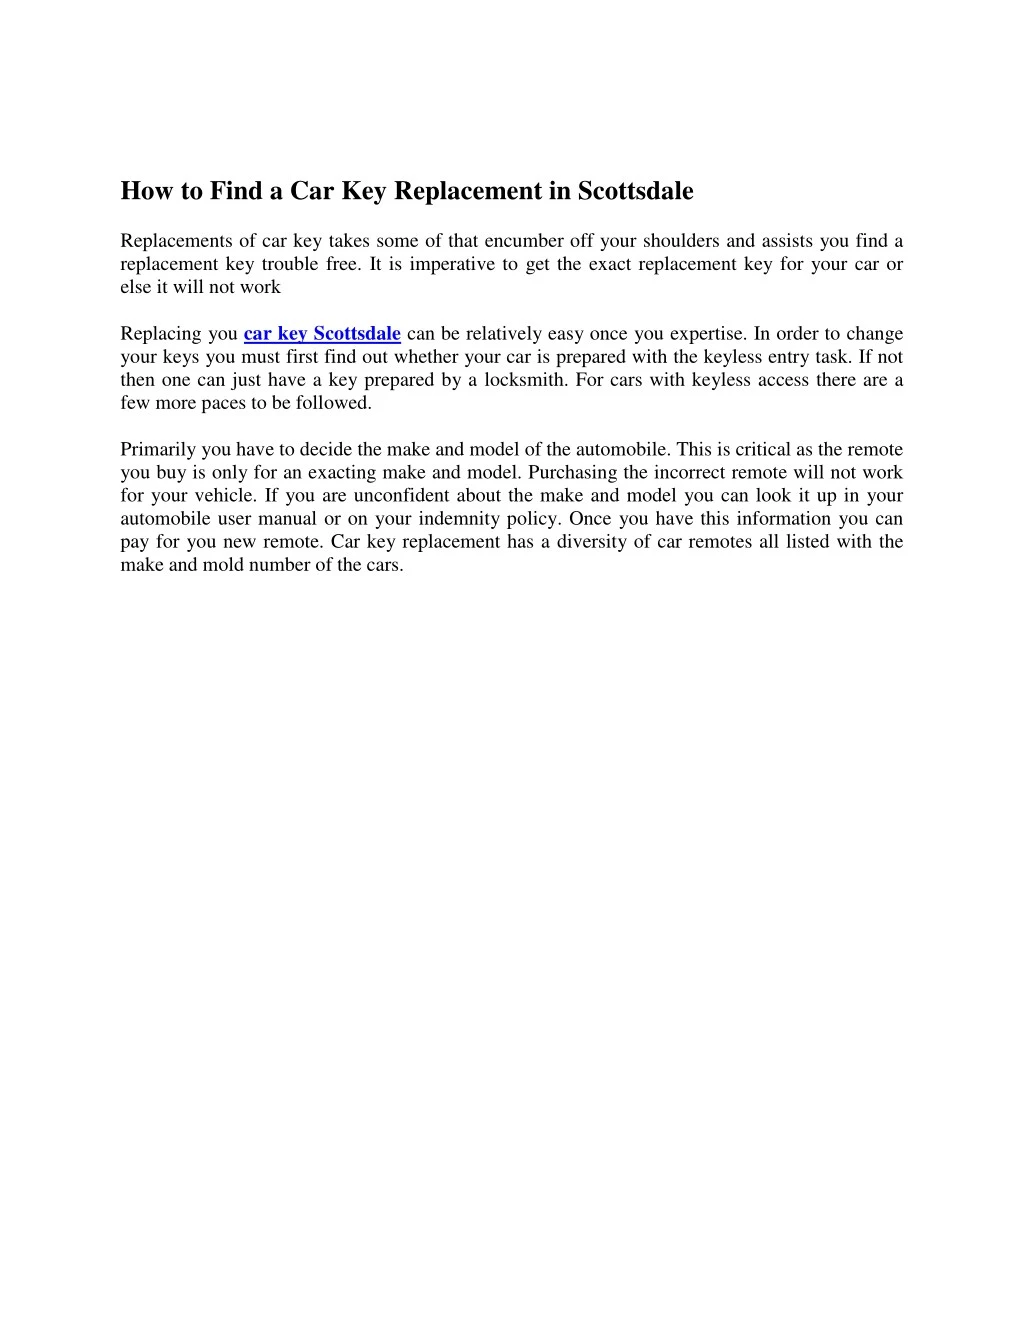 how to find a car key replacement in scottsdale